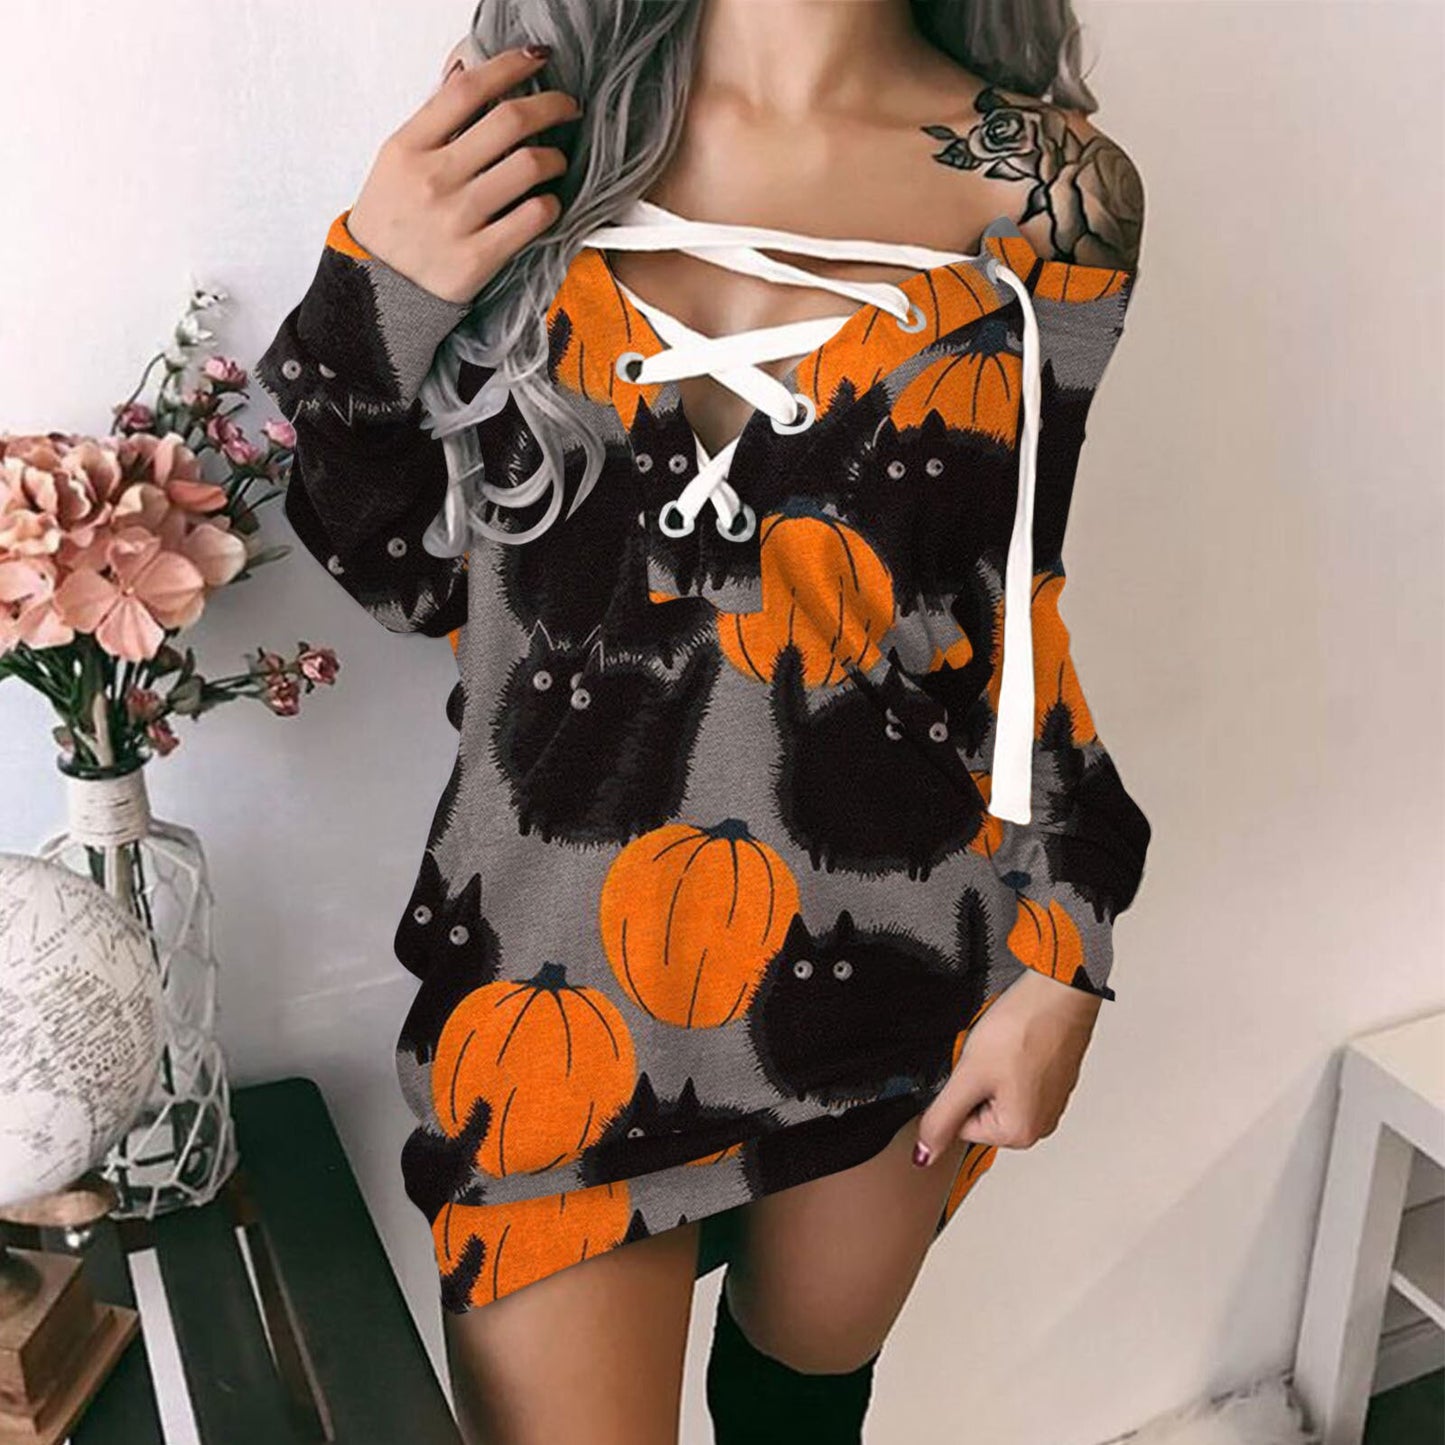 Halloween Dresses For Women Fashion Casual Prints Dress Off-shoulder Strappy Mini Dress Long Sleeves Vestidos Mujer Verano